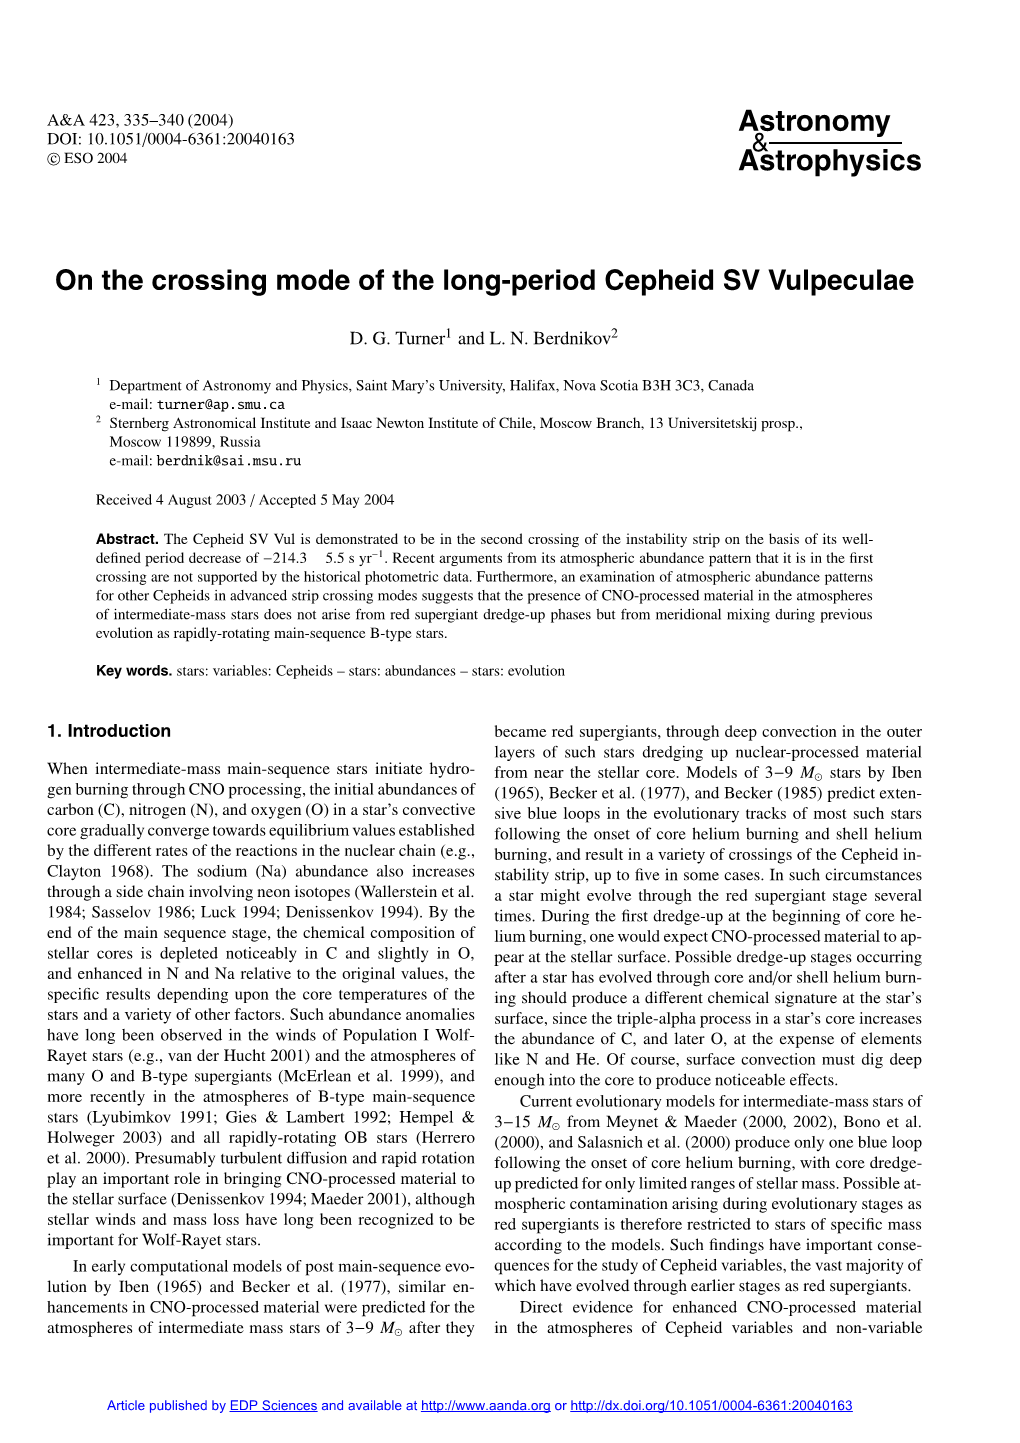 On the Crossing Mode of the Long-Period Cepheid SV Vulpeculae